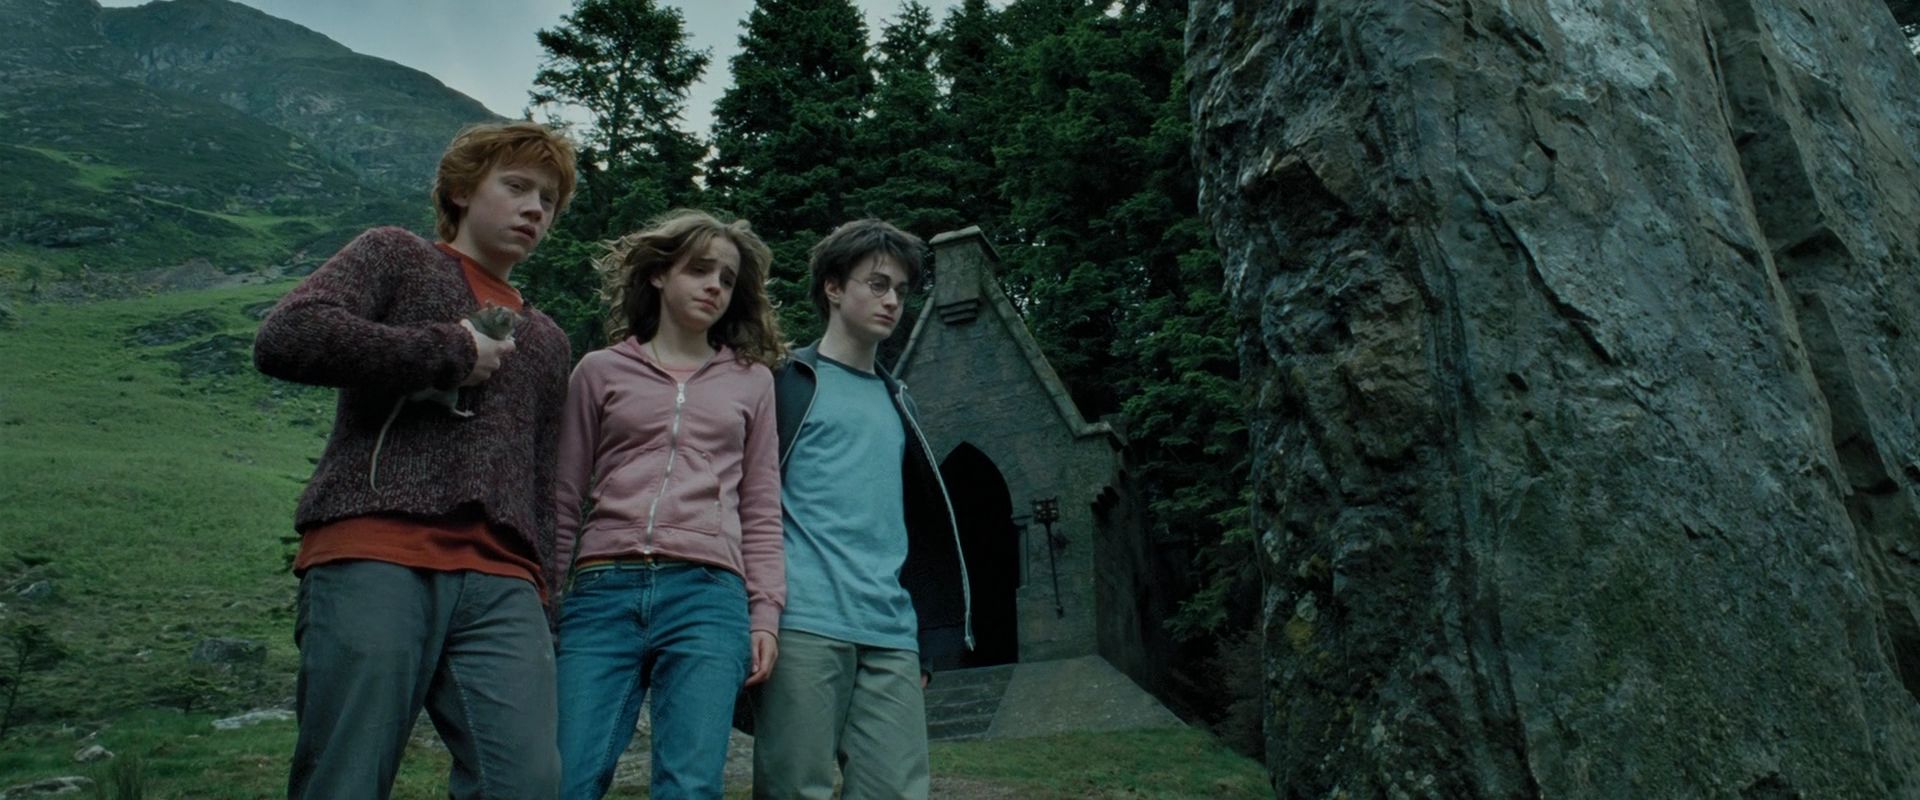 Image of Emma as Hermione Granger In Harry Potter and The Prisoner Of A...